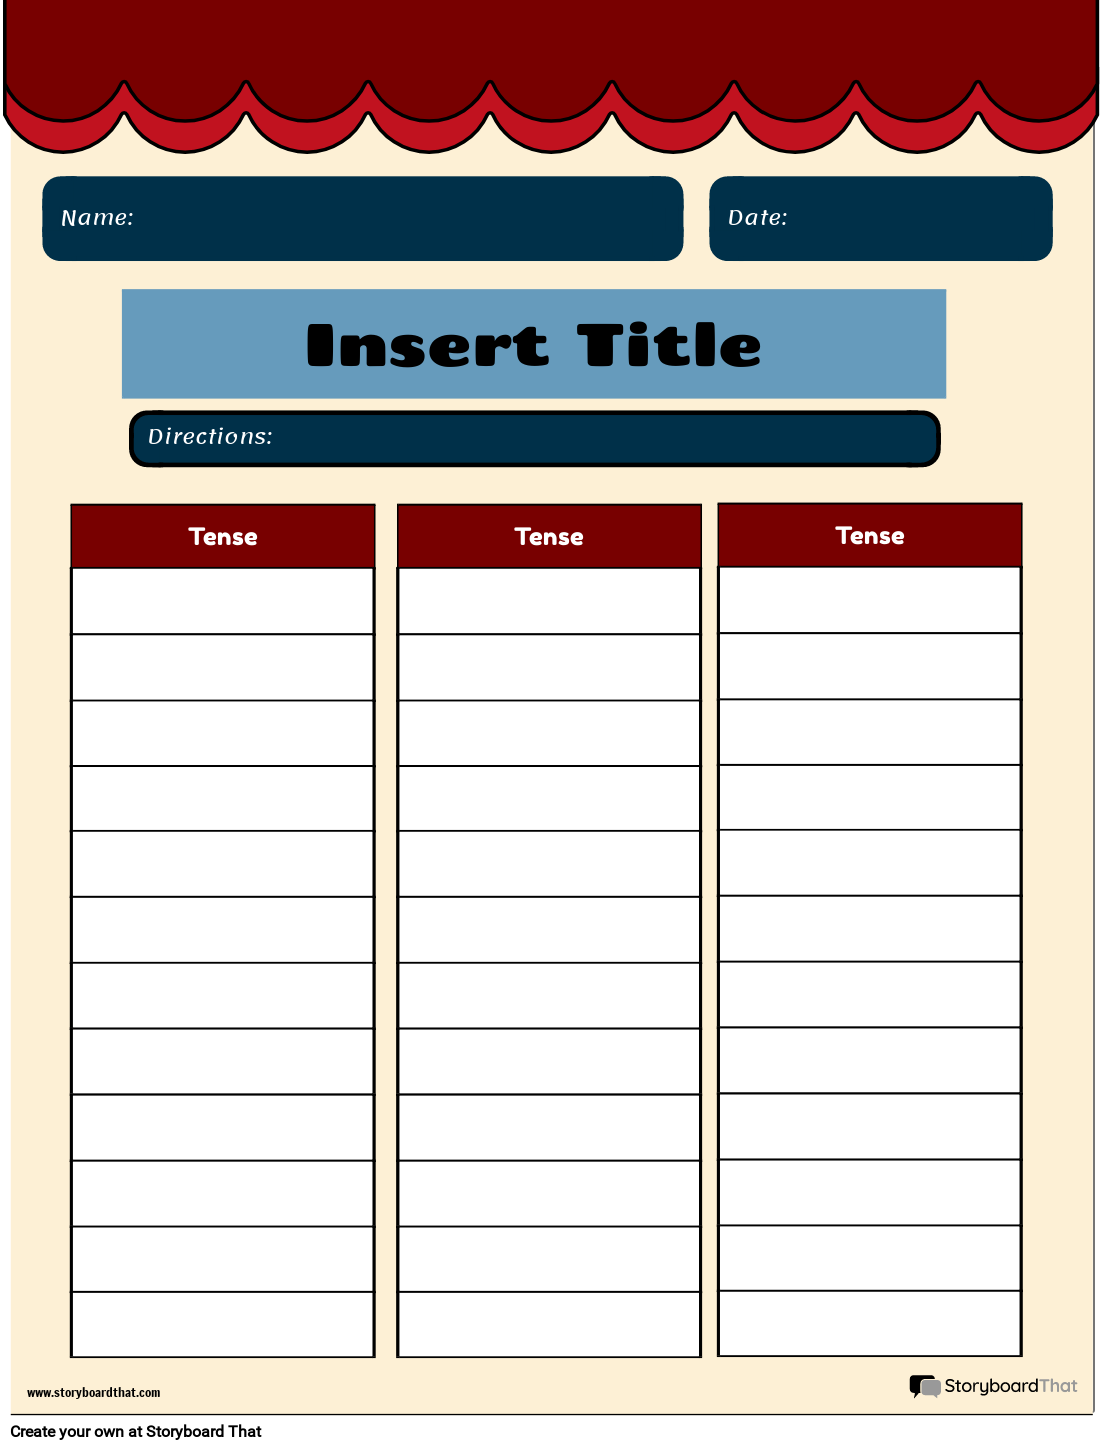 Present Tense, Future Tense, and Past Tense Form Verb Table